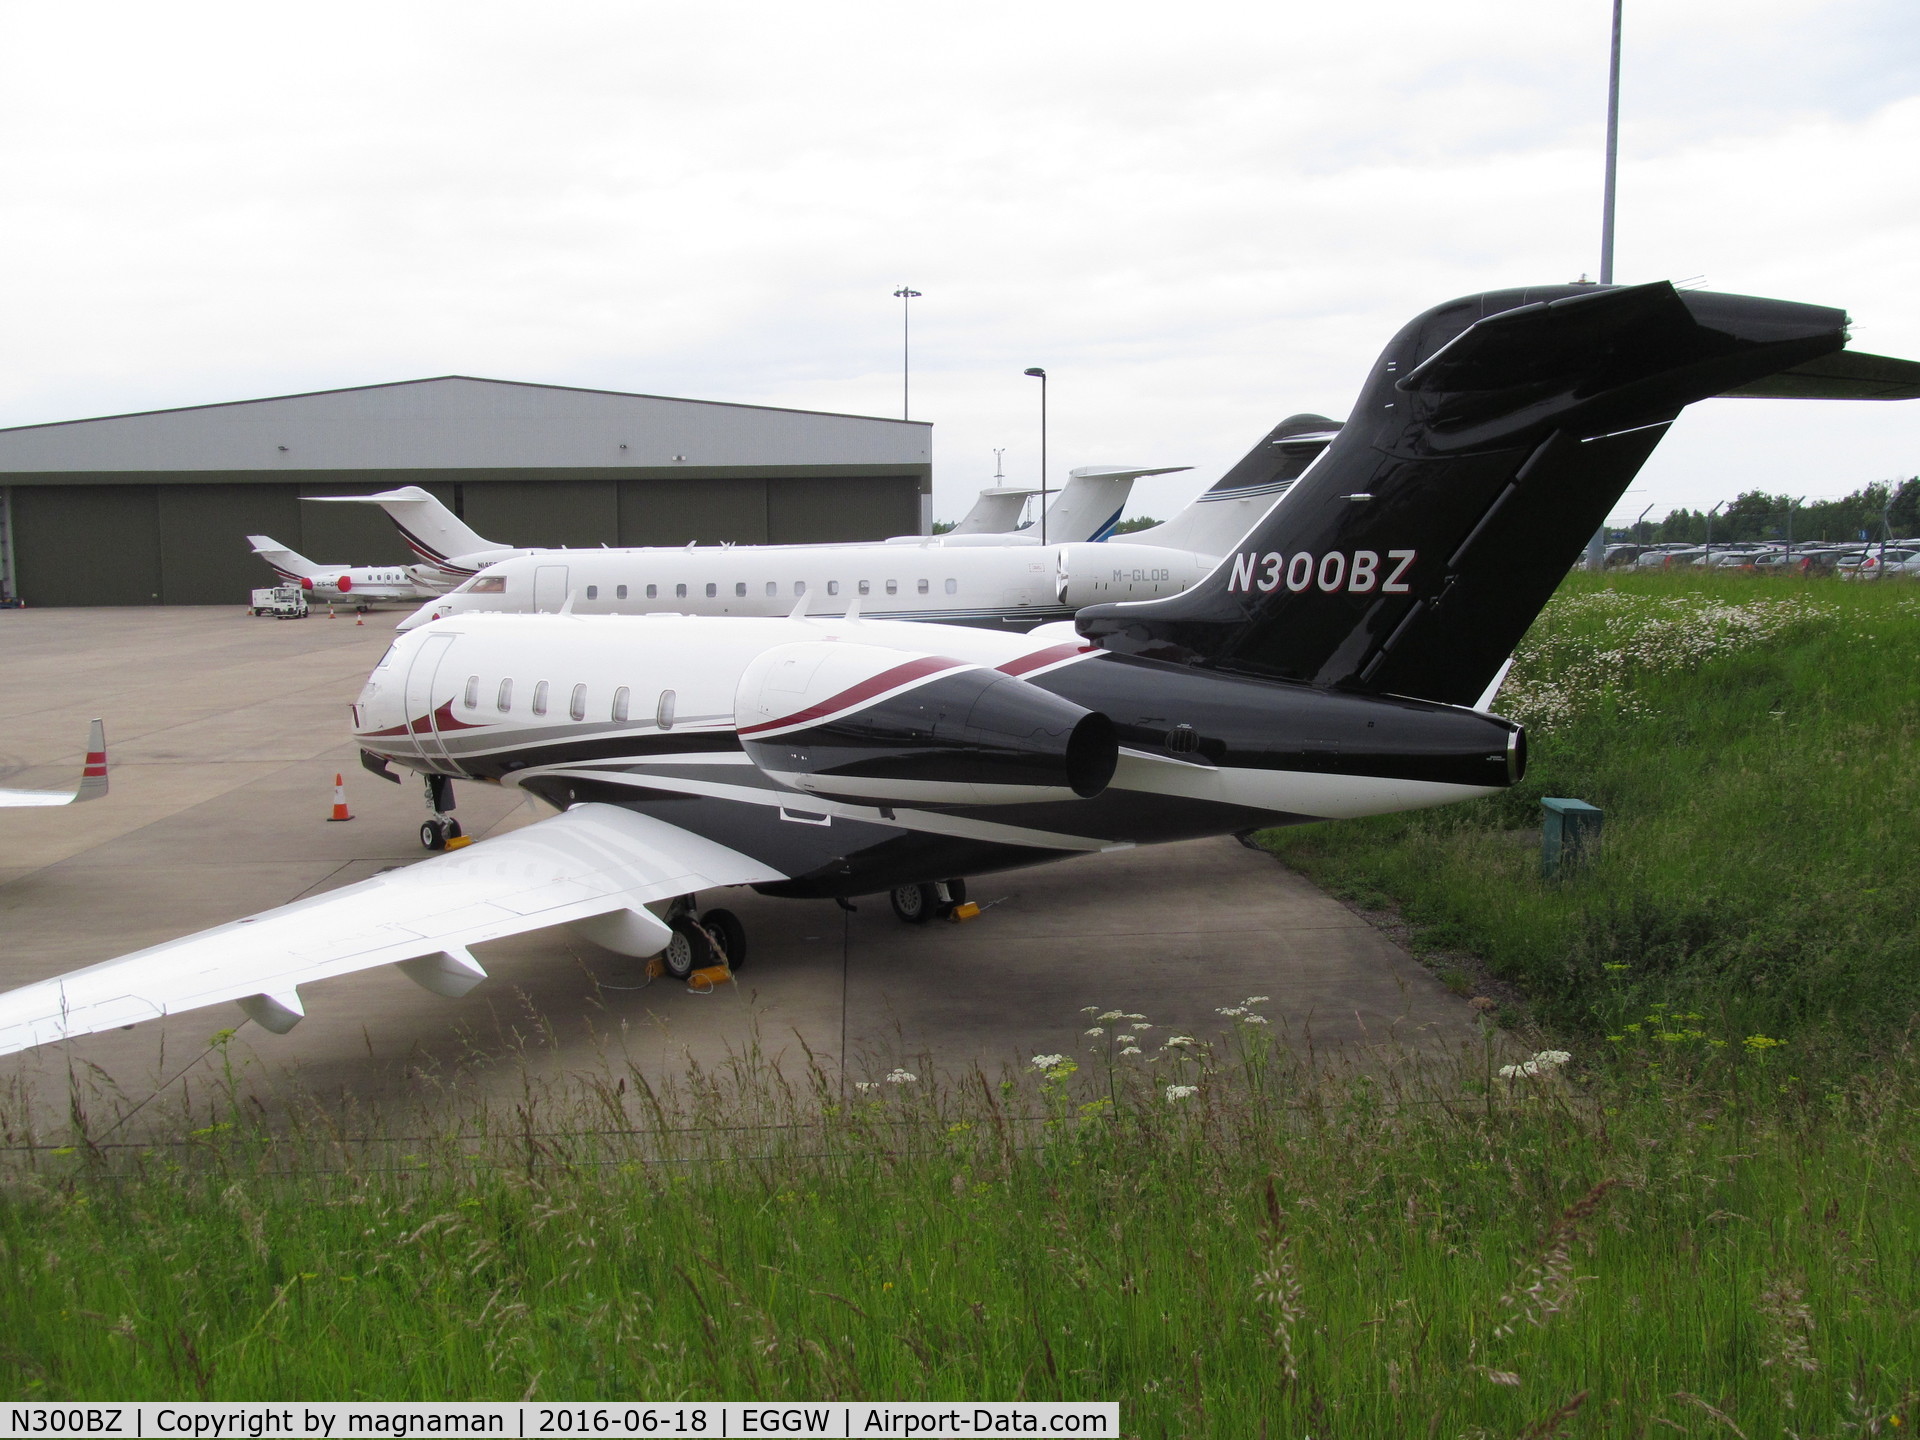 N300BZ, 2004 Bombardier Challenger 300 (BD-100-1A10) C/N 20030, nice challenger 300